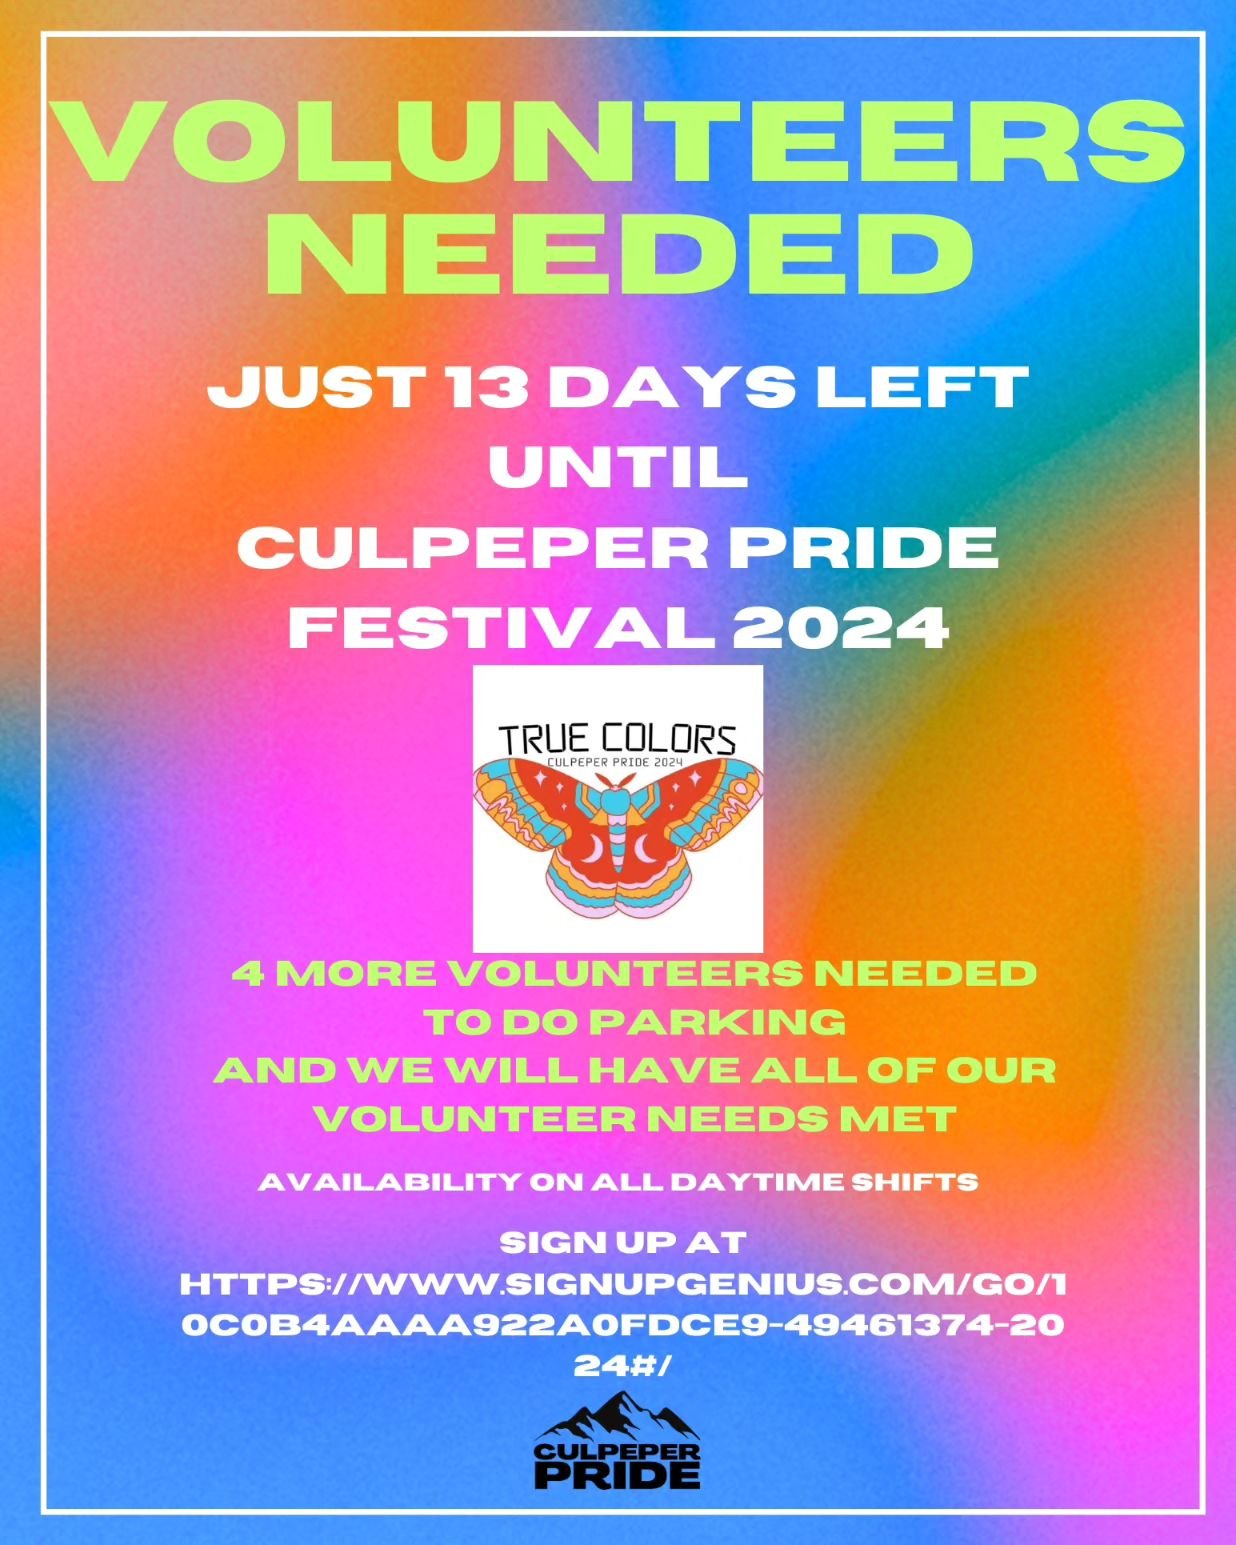 There are just 13 days left until our 2024 Culpeper Pride Festival, and we still need a few more volunteers! Sign up at the link below if you're interested! ✨️💖🌈🙂

https://www.signupgenius.com/go/10C0B4AAAA922A0FDCE9-49461374-2024